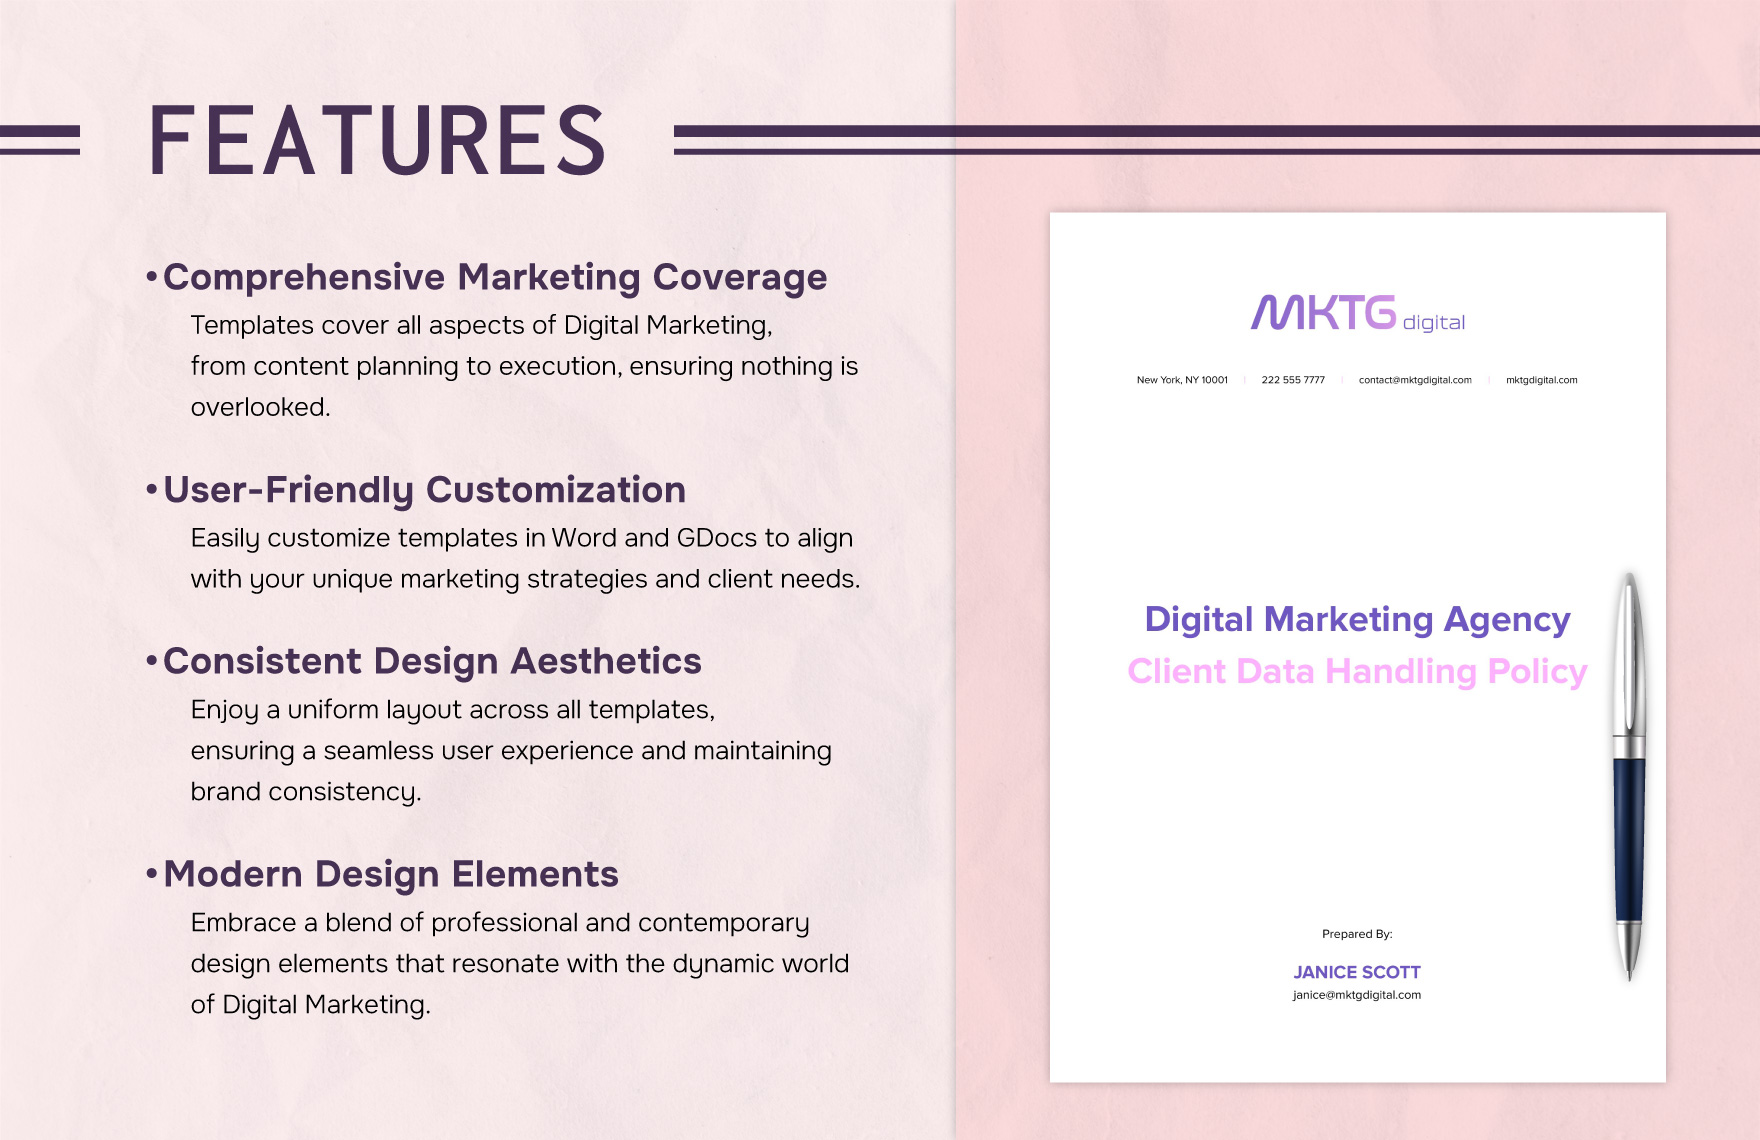 Digital Marketing Agency Client Data Handling Policy Template